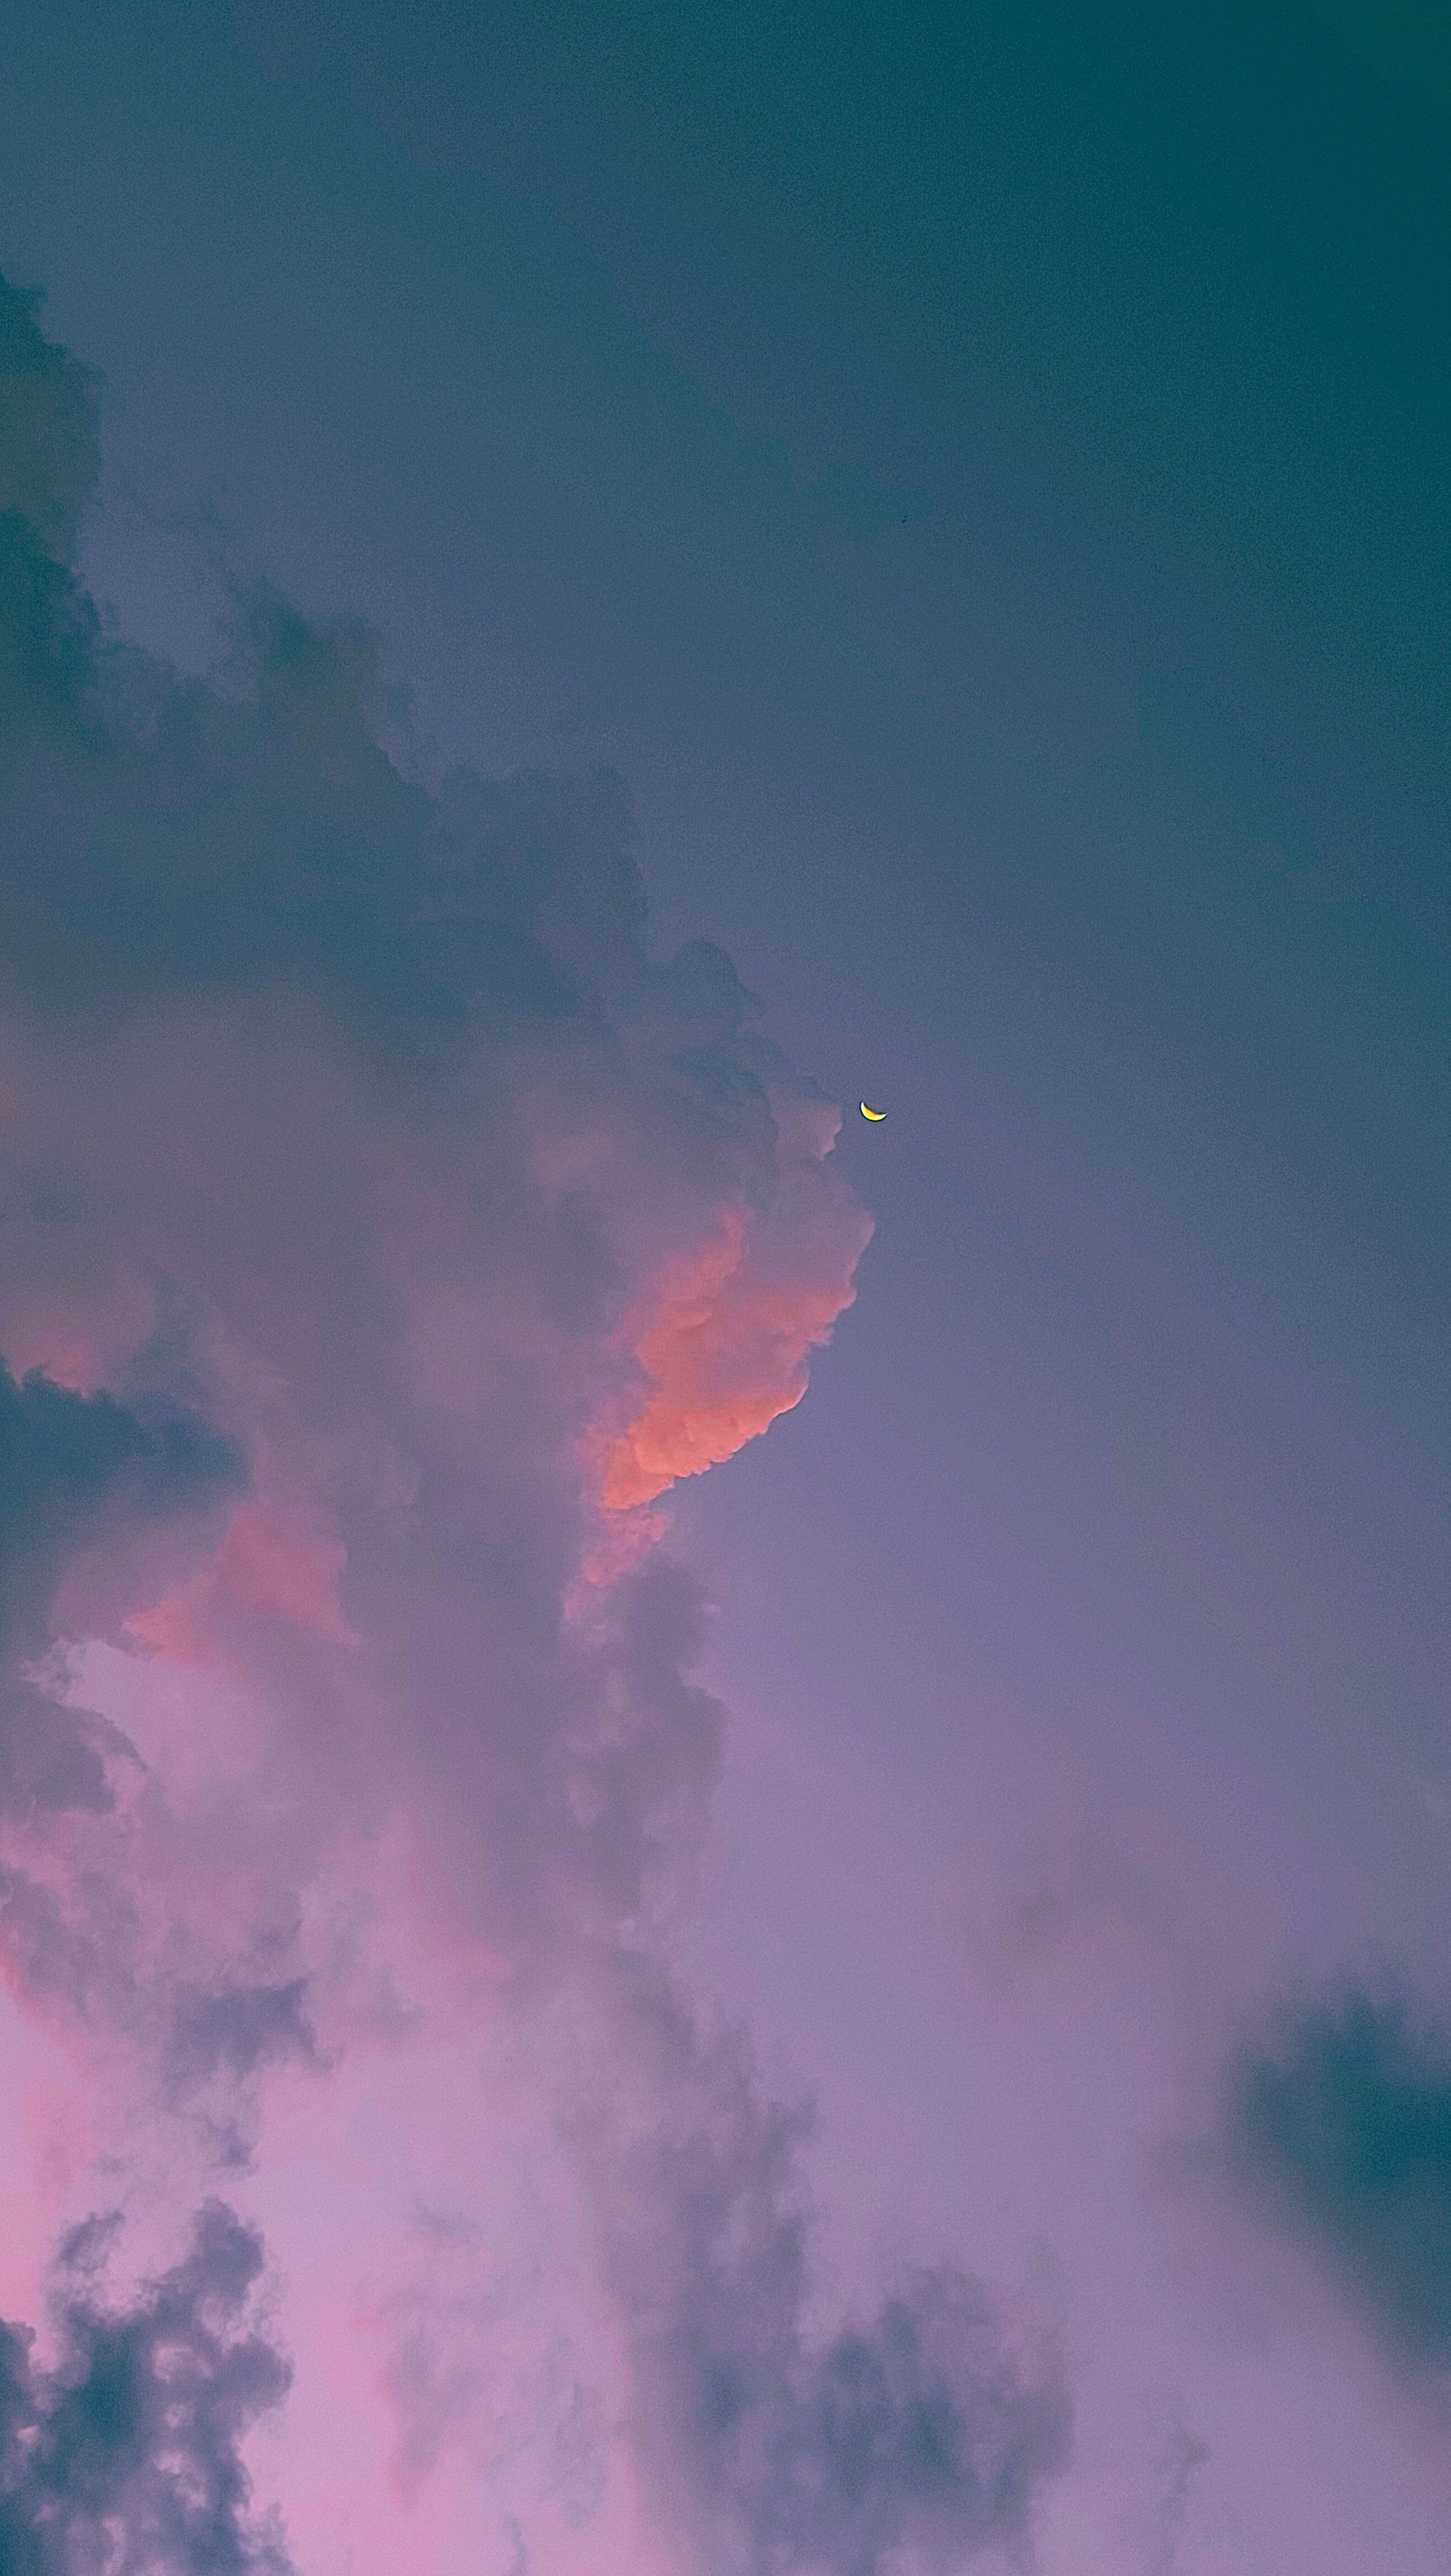 A plane flying through the clouds at sunset - Photography